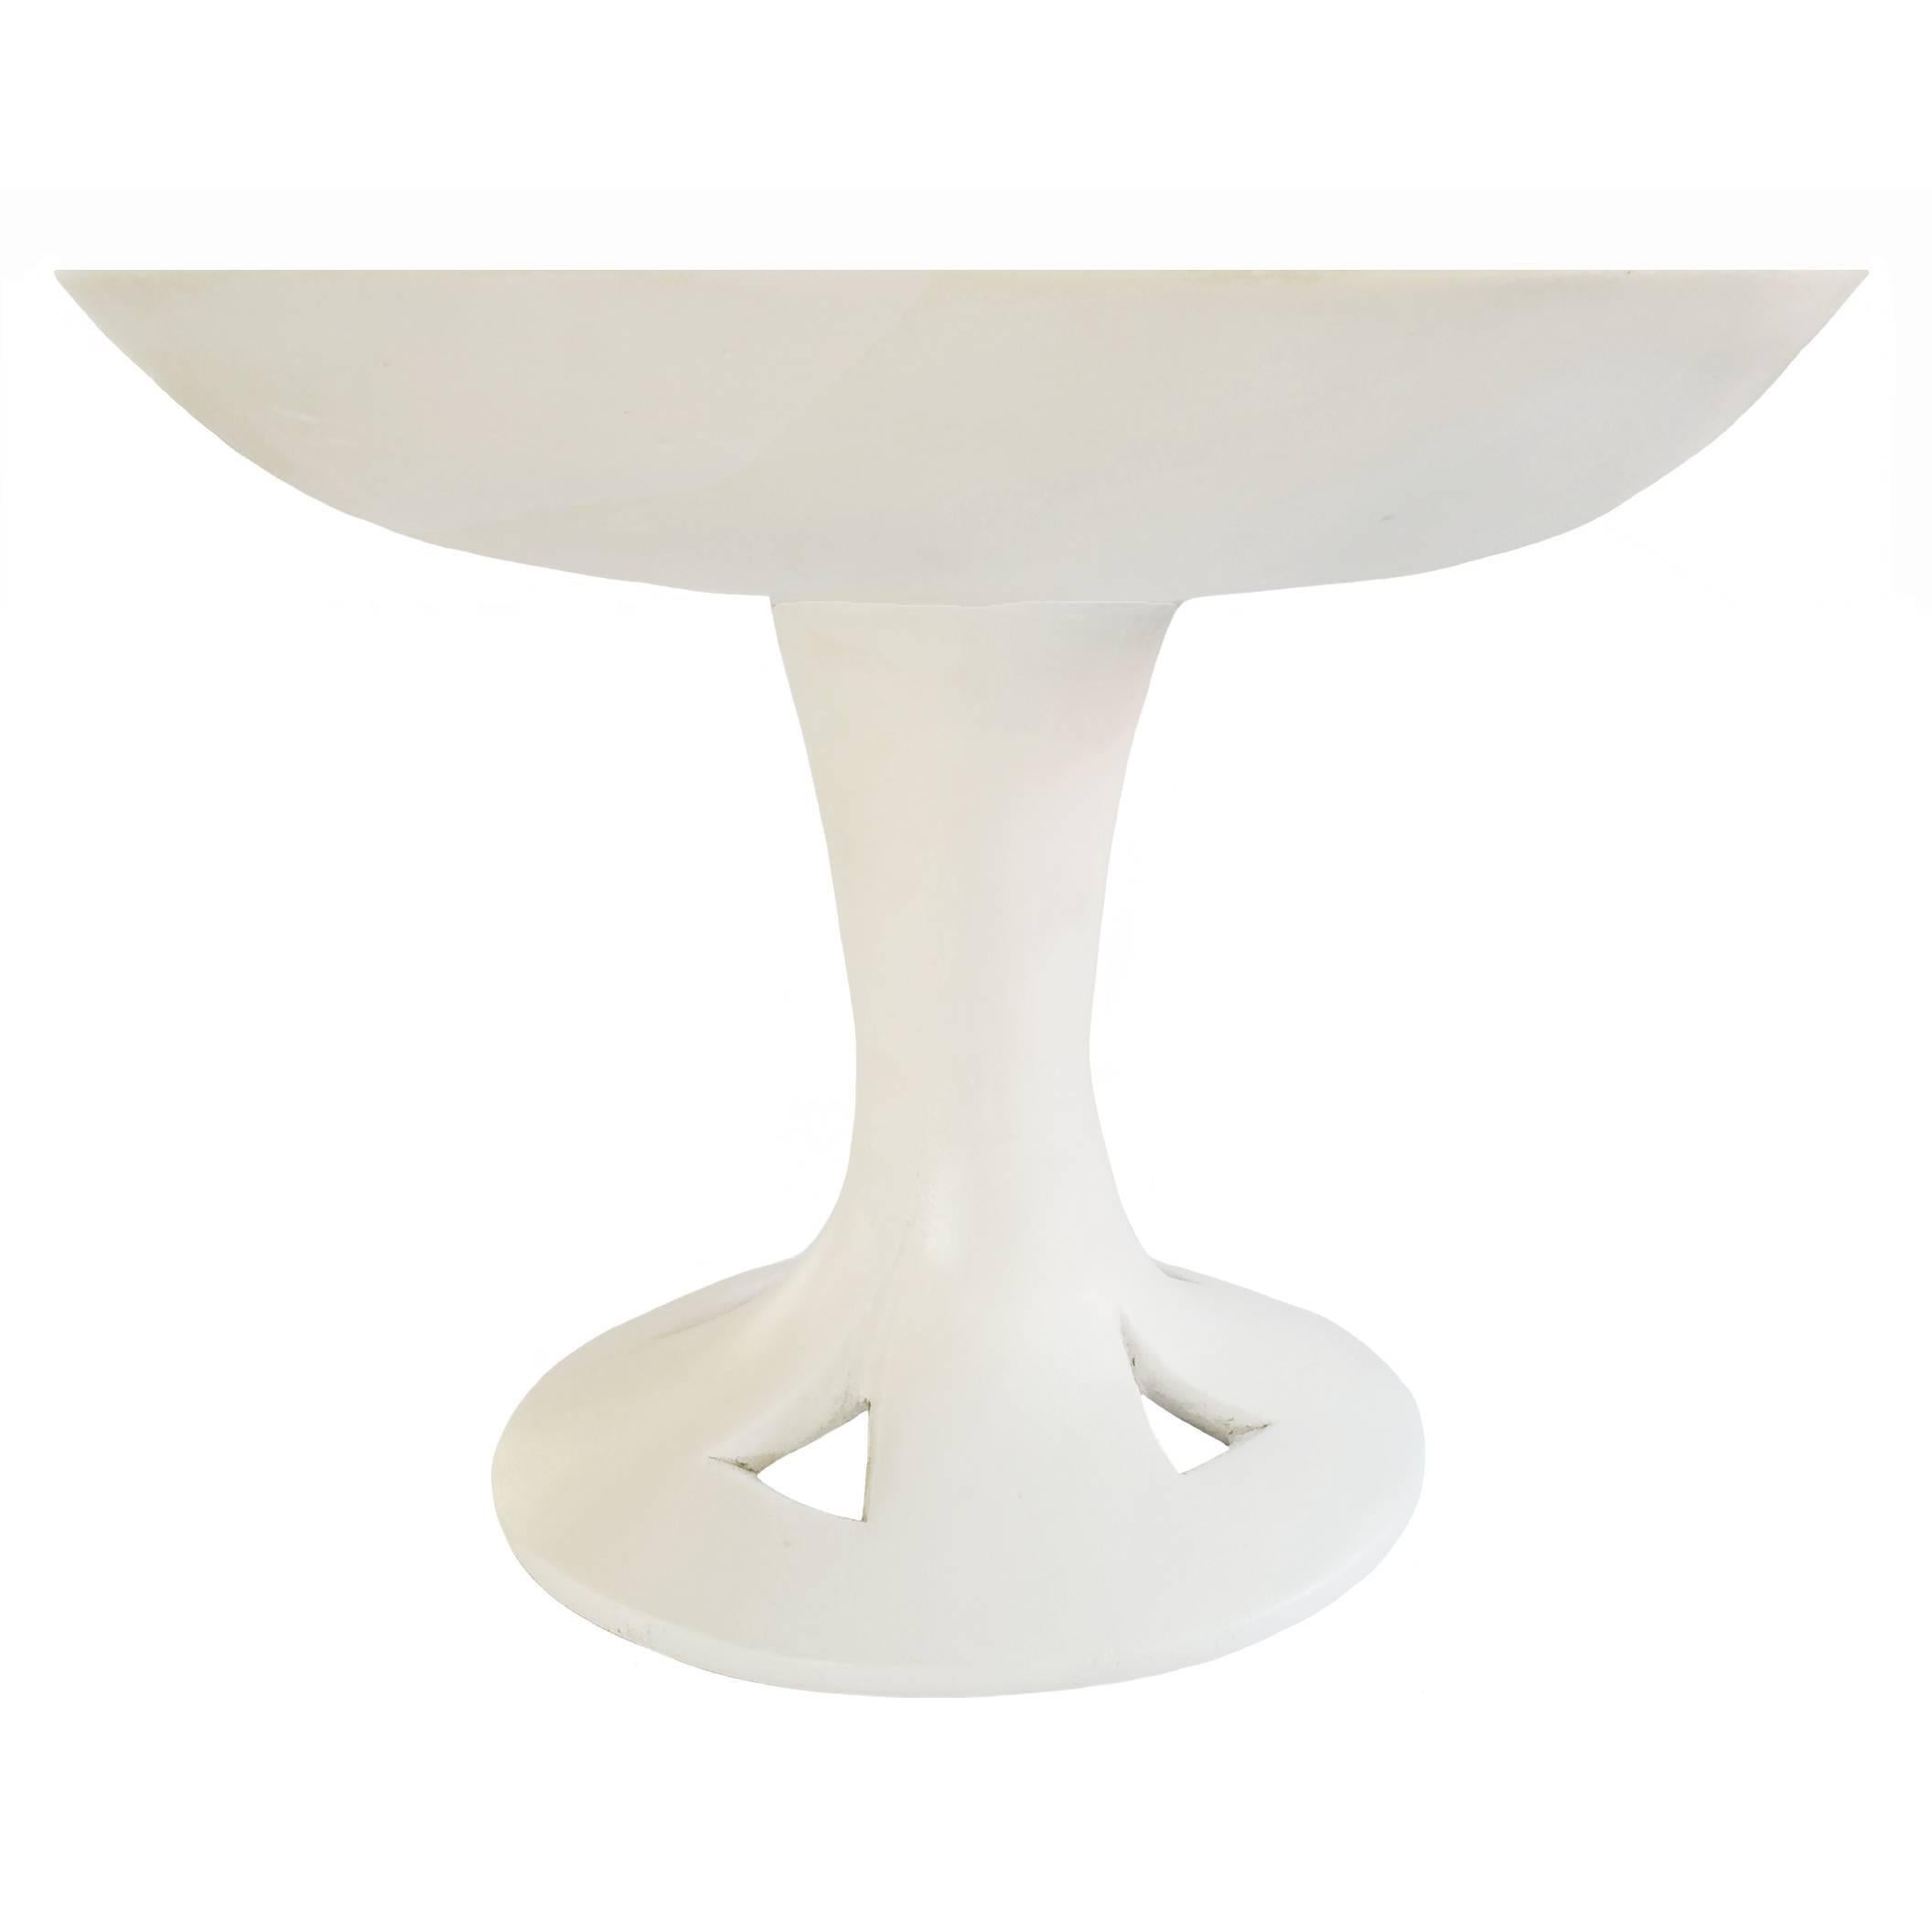 Lacquered White Naga Plate on Stand